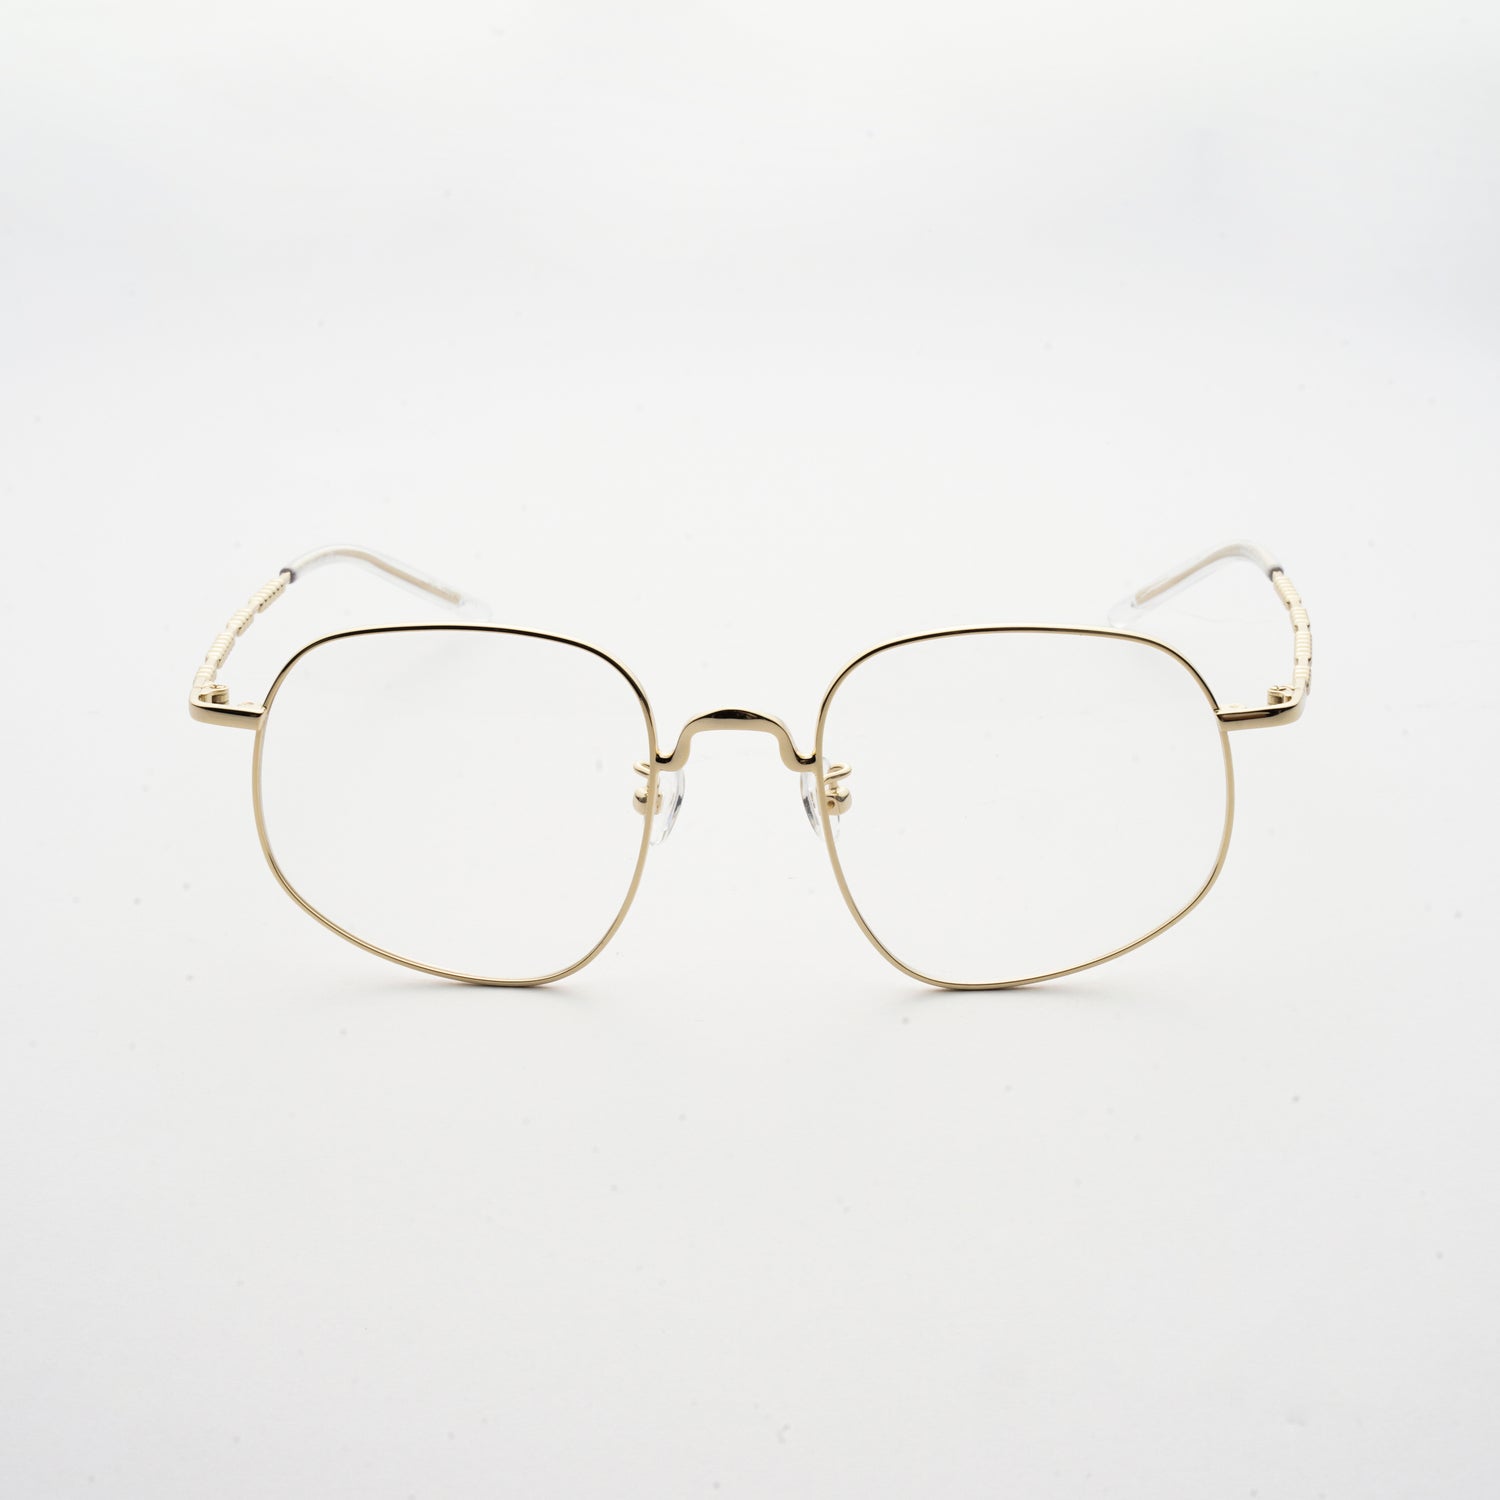 pale gold colour stainless steel optical frame with morse code details on the temples front